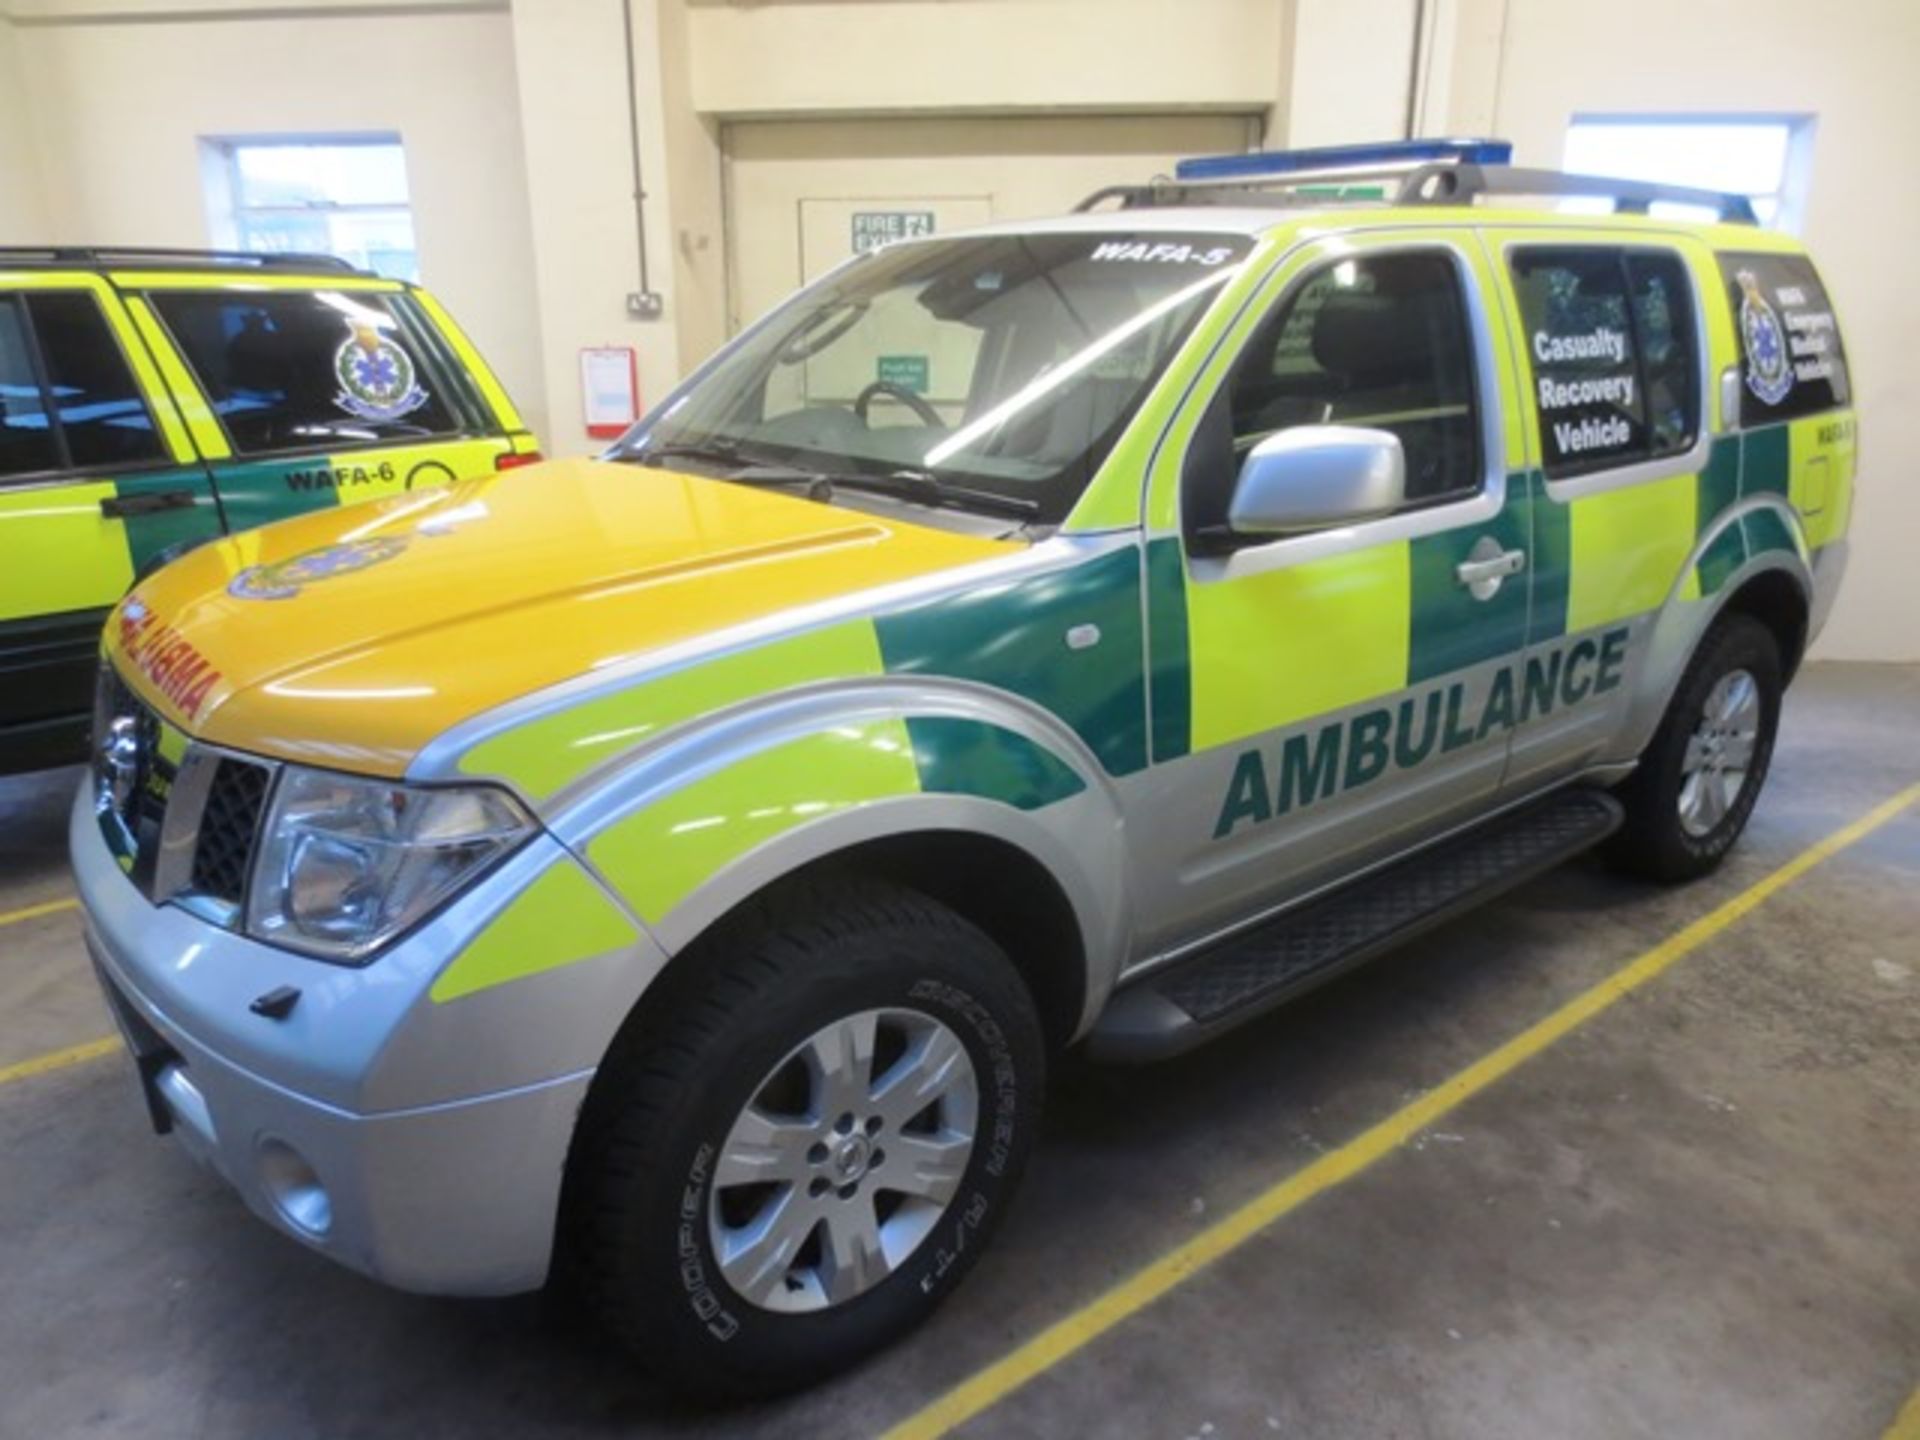 Nissan Pathfinder T-spec DCi 174 4x4 casualty recovery vehicle, reg no: YD55 JHZ, MOT: expired 16/